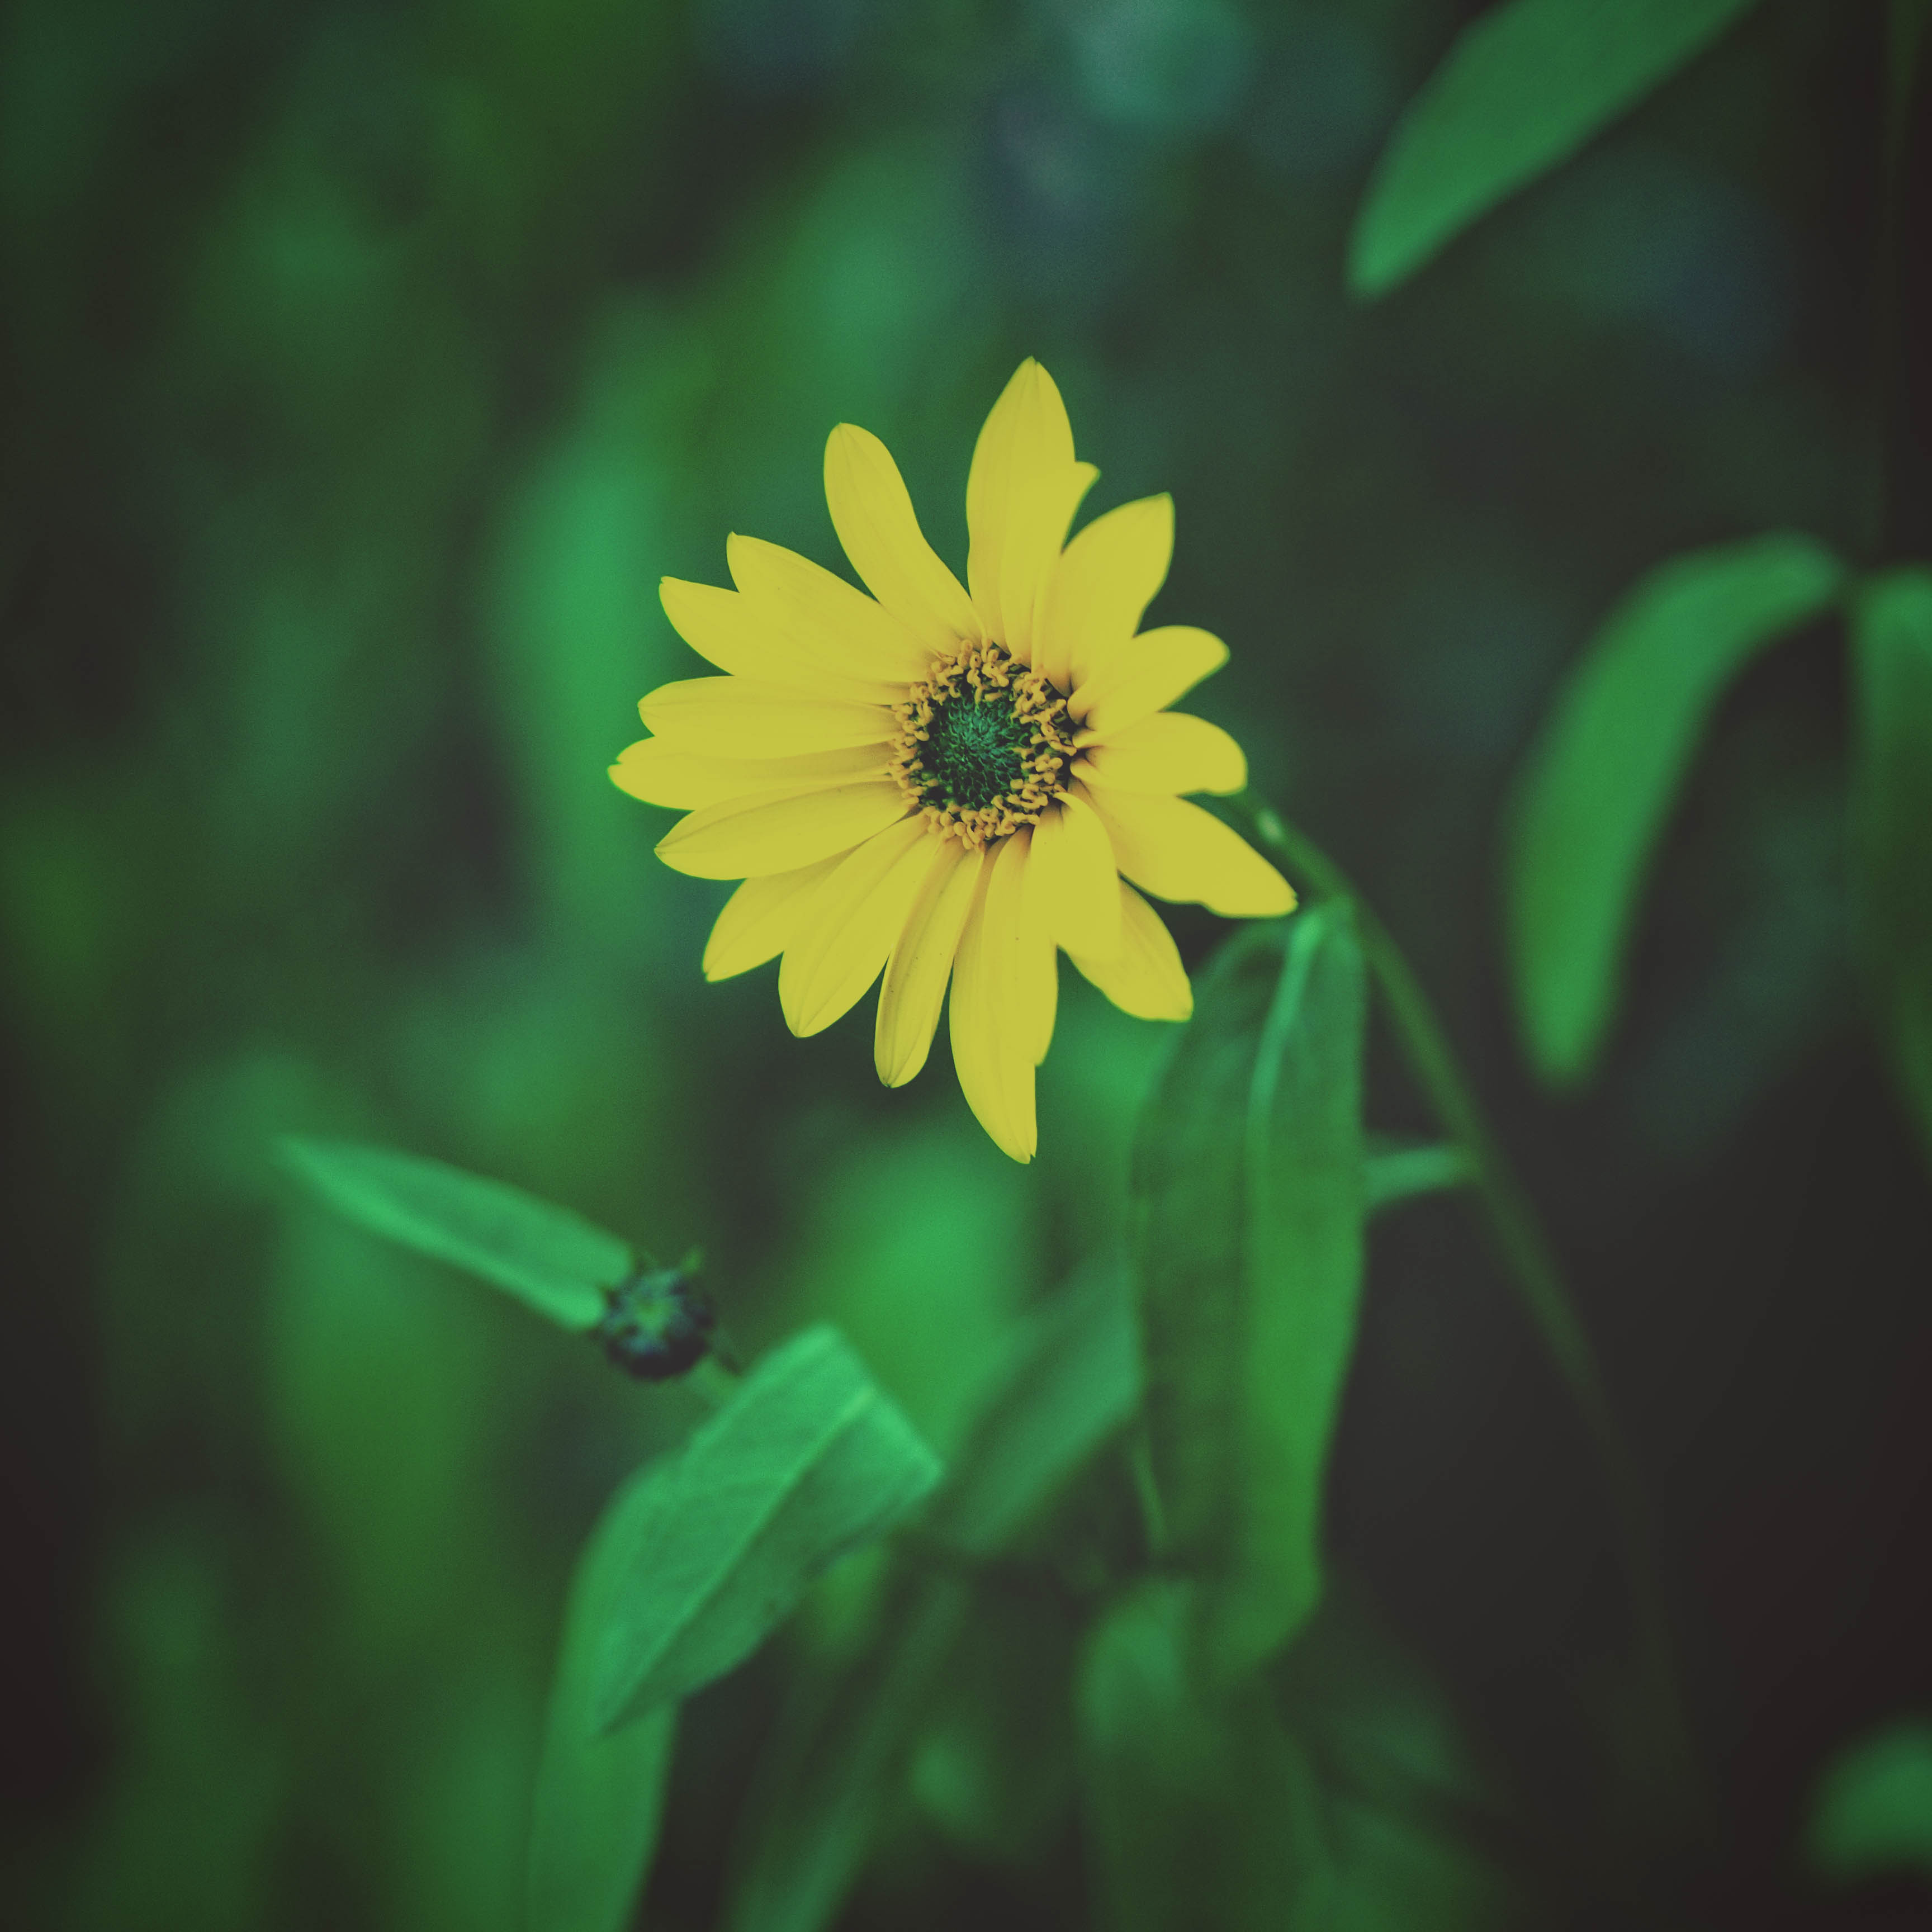 smooth, blur, yellow, flowers, flower, flower bed, flowerbed, foliage